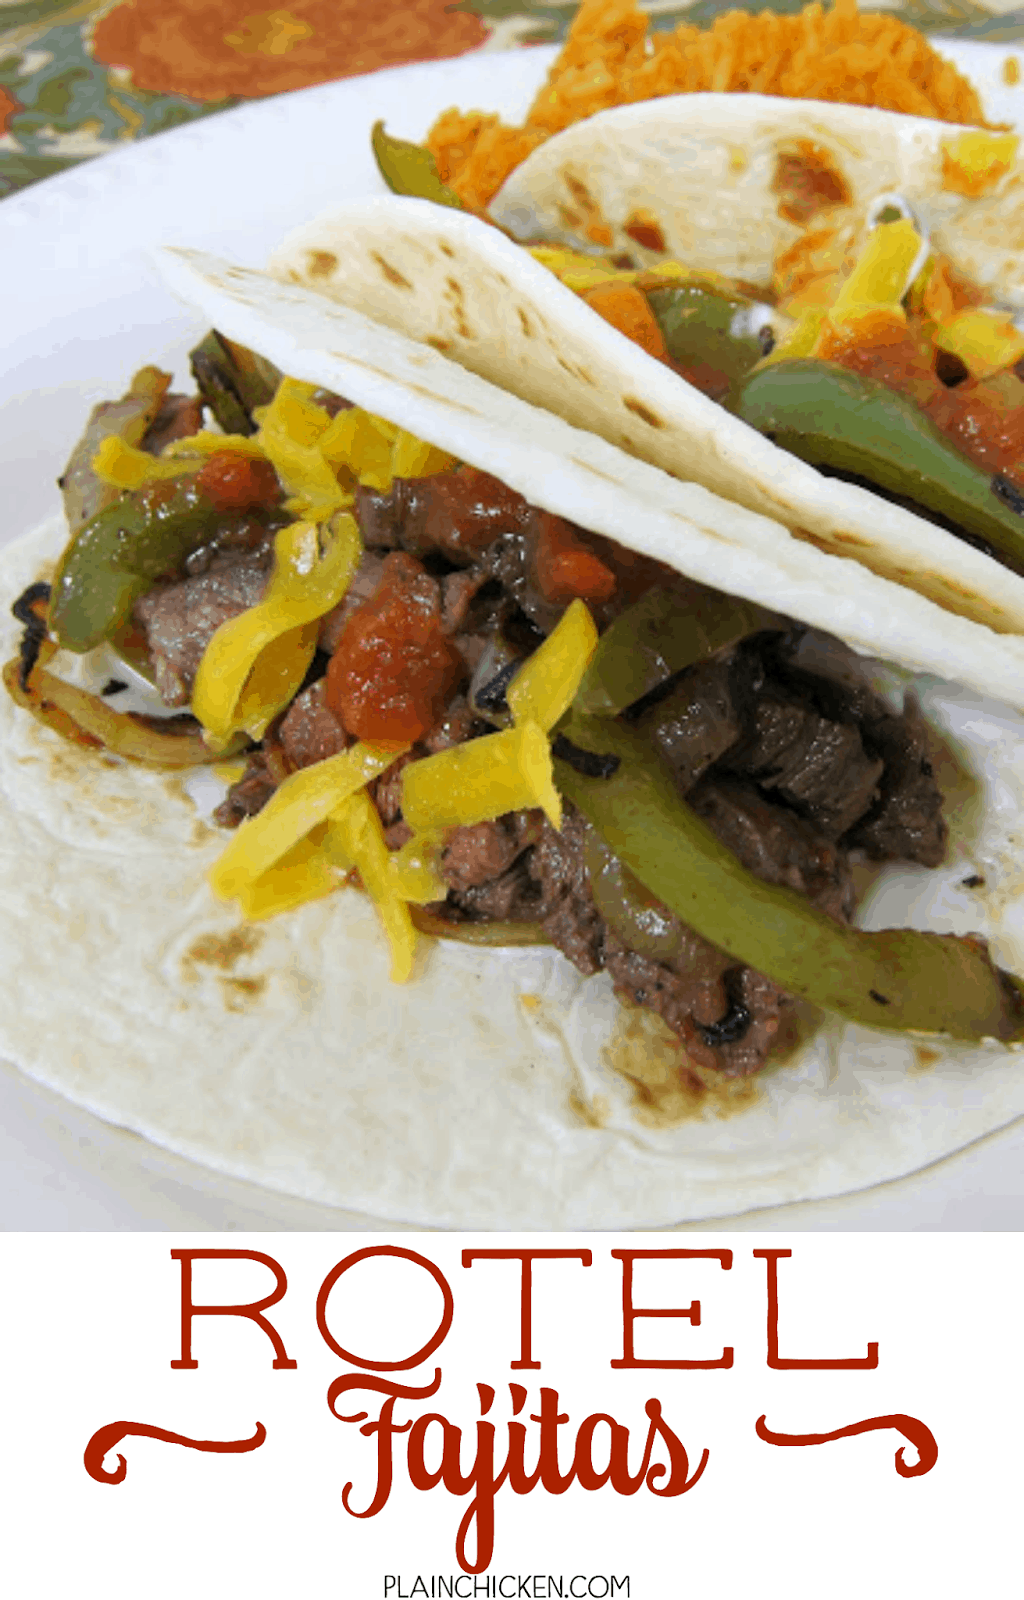 Rotel Fajitas - THE BEST fajitas! SO easy and CRAZY good! Marinate chicken or skirt steak in Rotel, beer, lemon juice, Worcestershire, garlic and pepper. Add onions and peppers to the skillet for great flavor. Our favorite Mexican recipe!